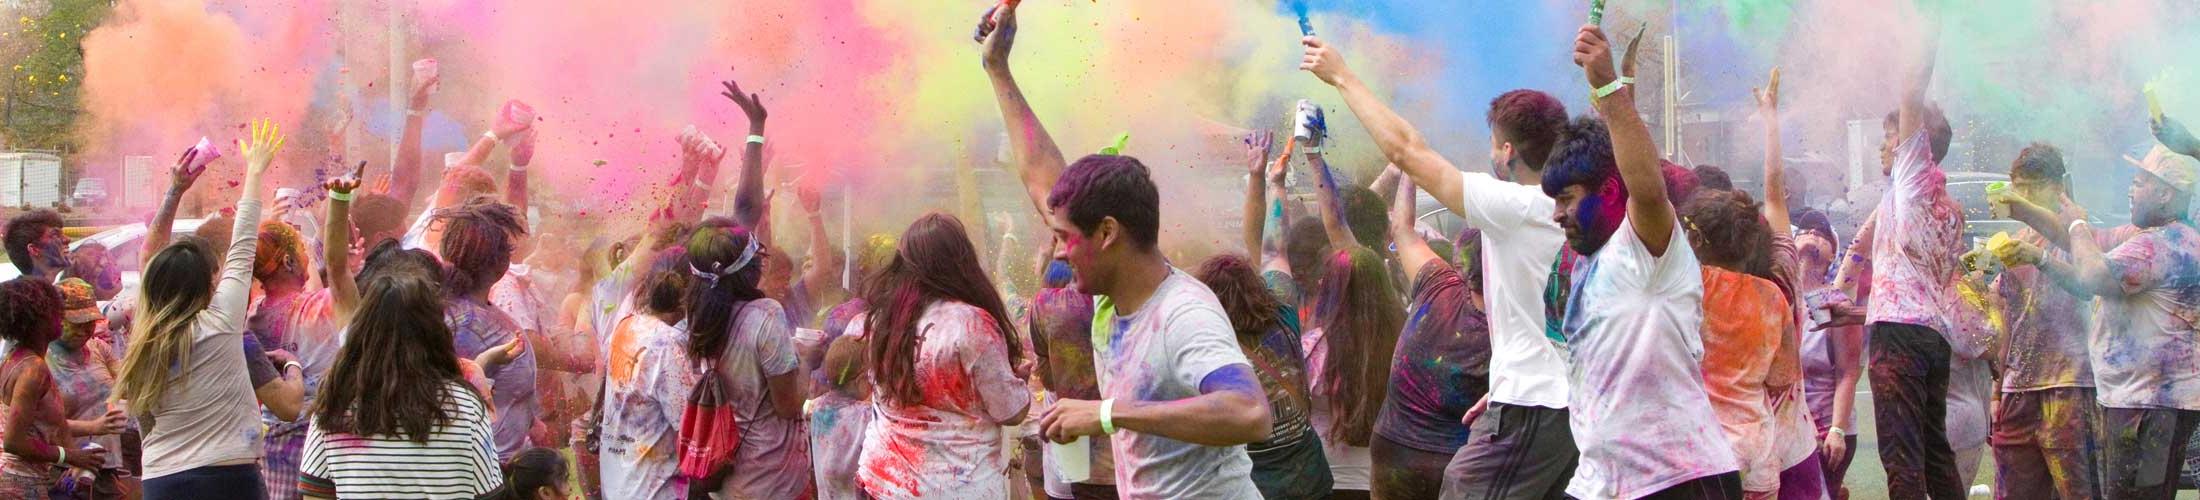 Students throwing color in event